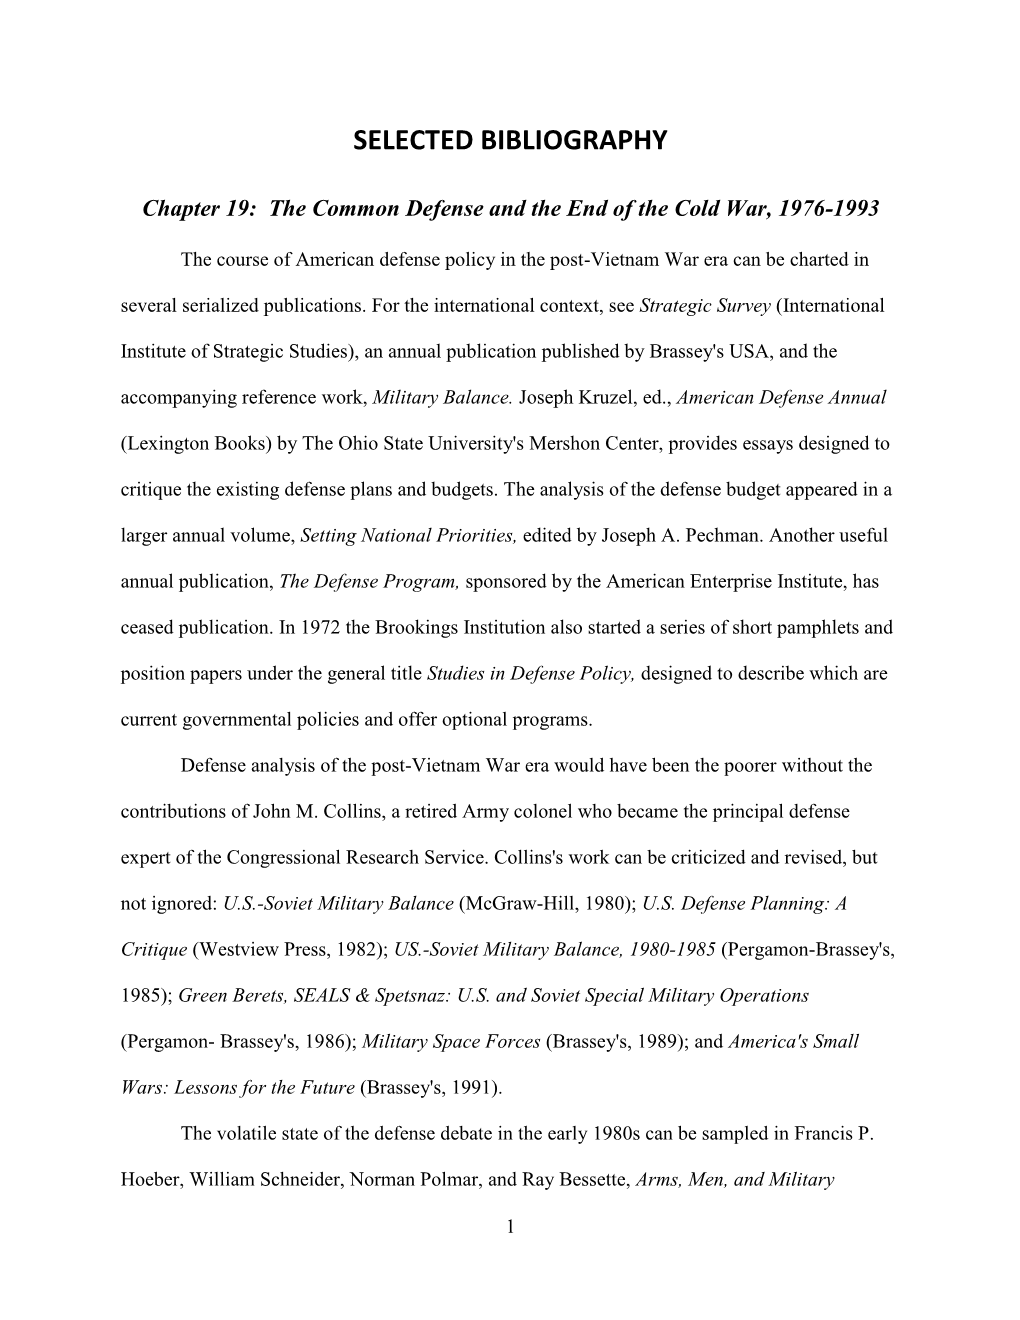 Chapter 19: the Common Defense and the End of the Cold War, 1976-1993